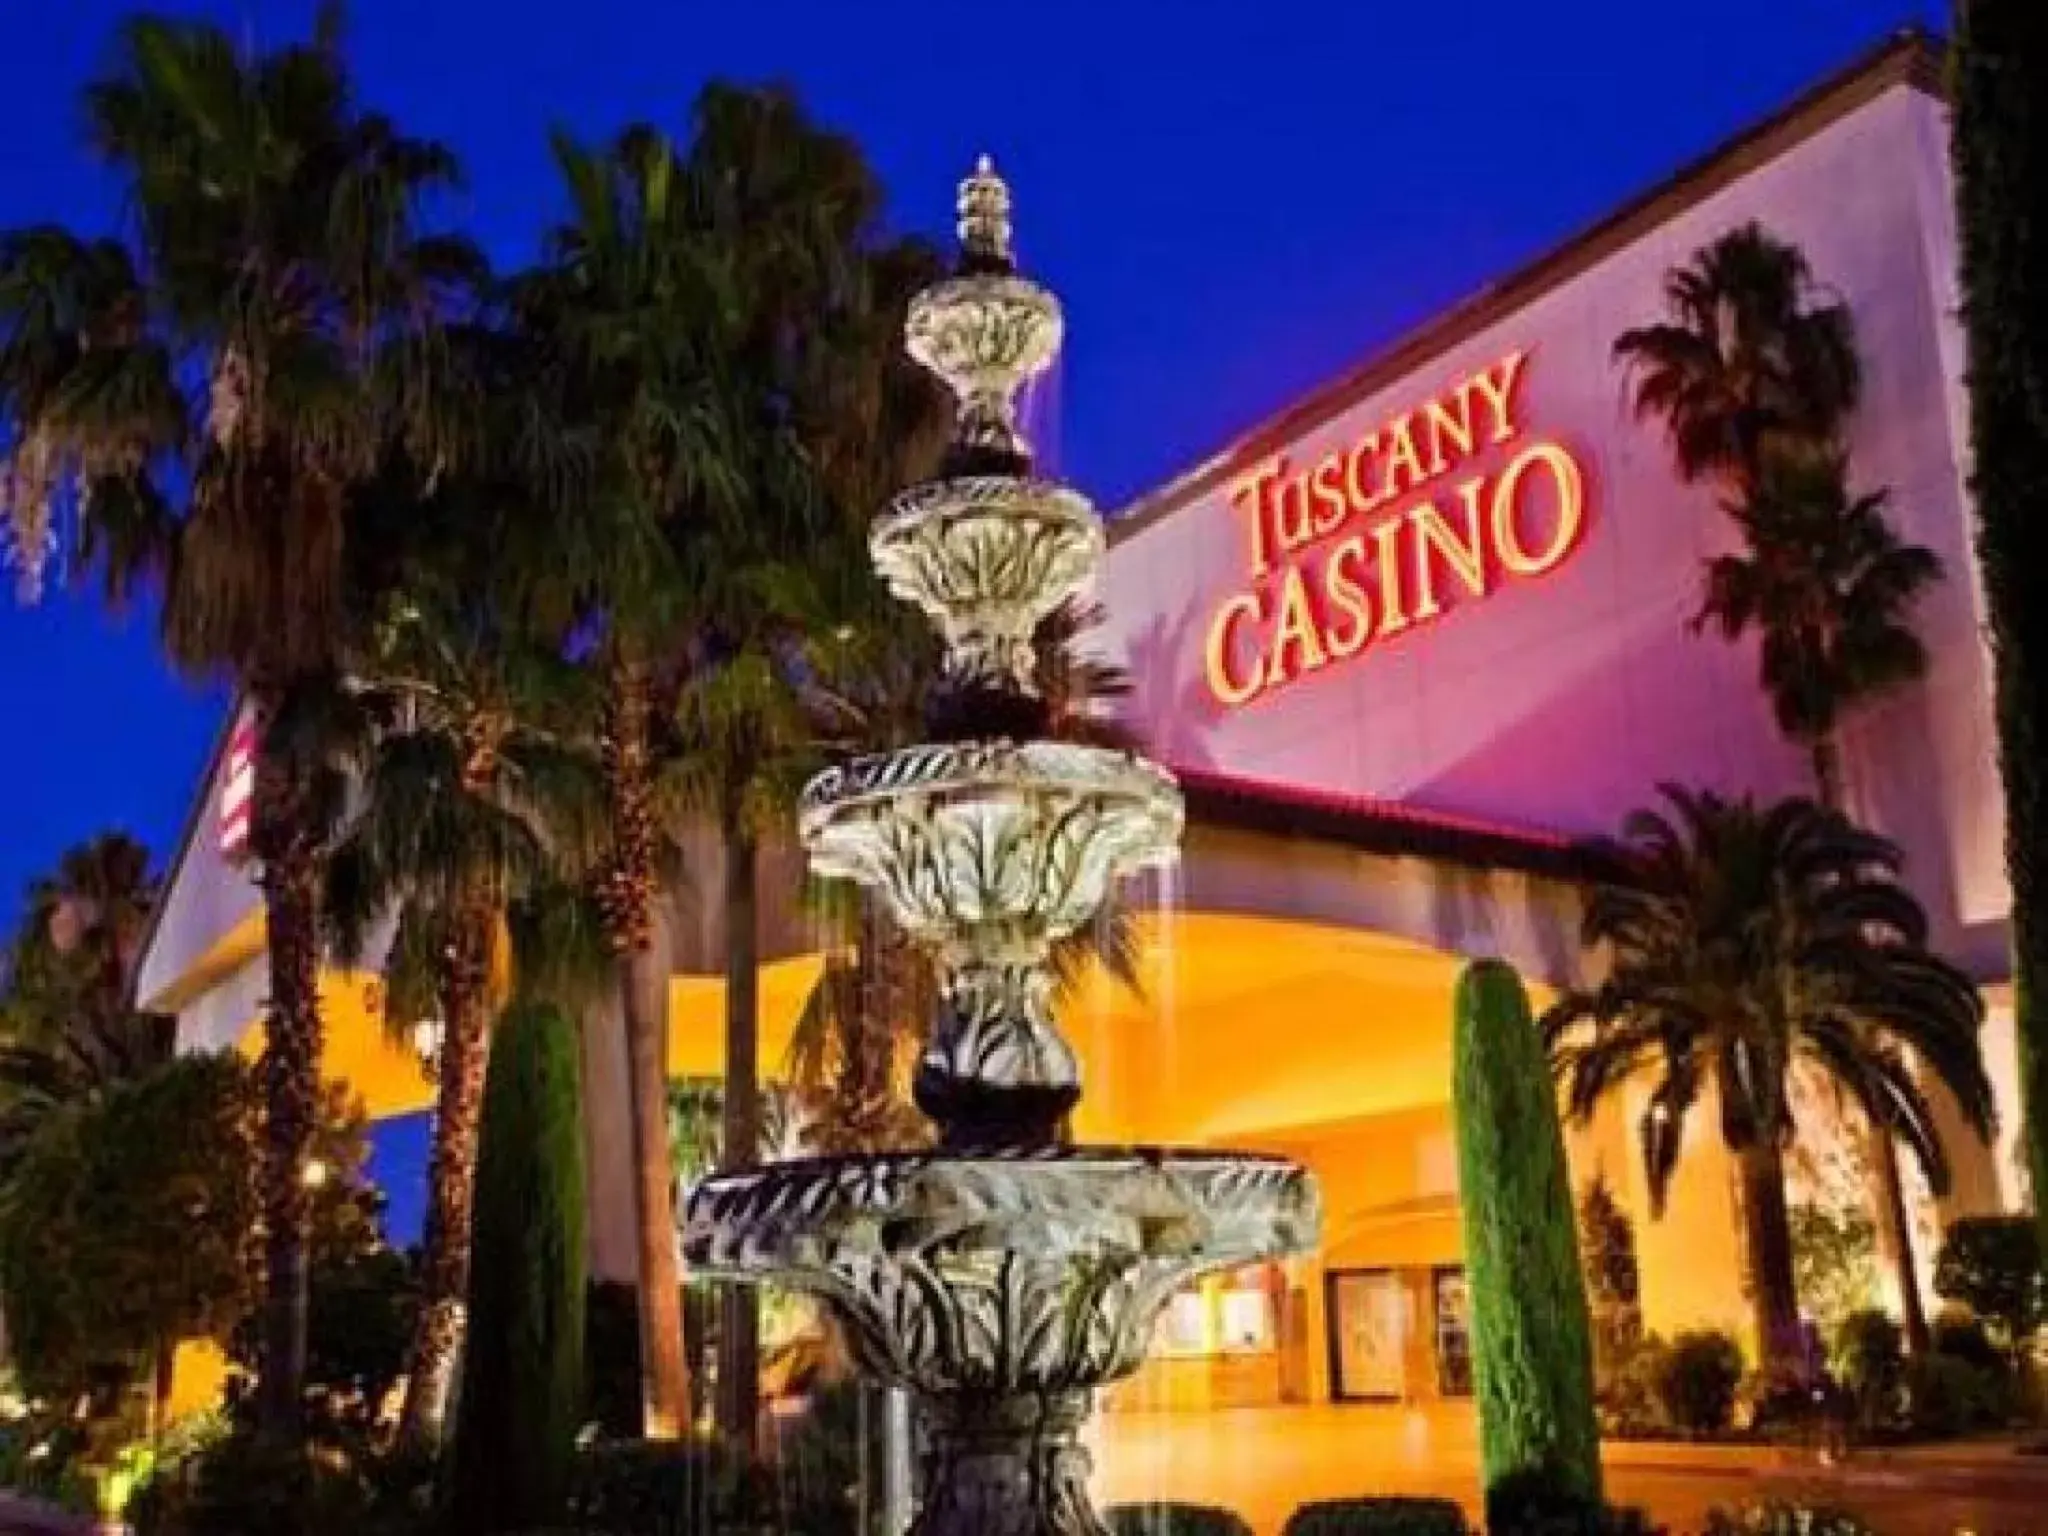 Property building in Tuscany Suites & Casino